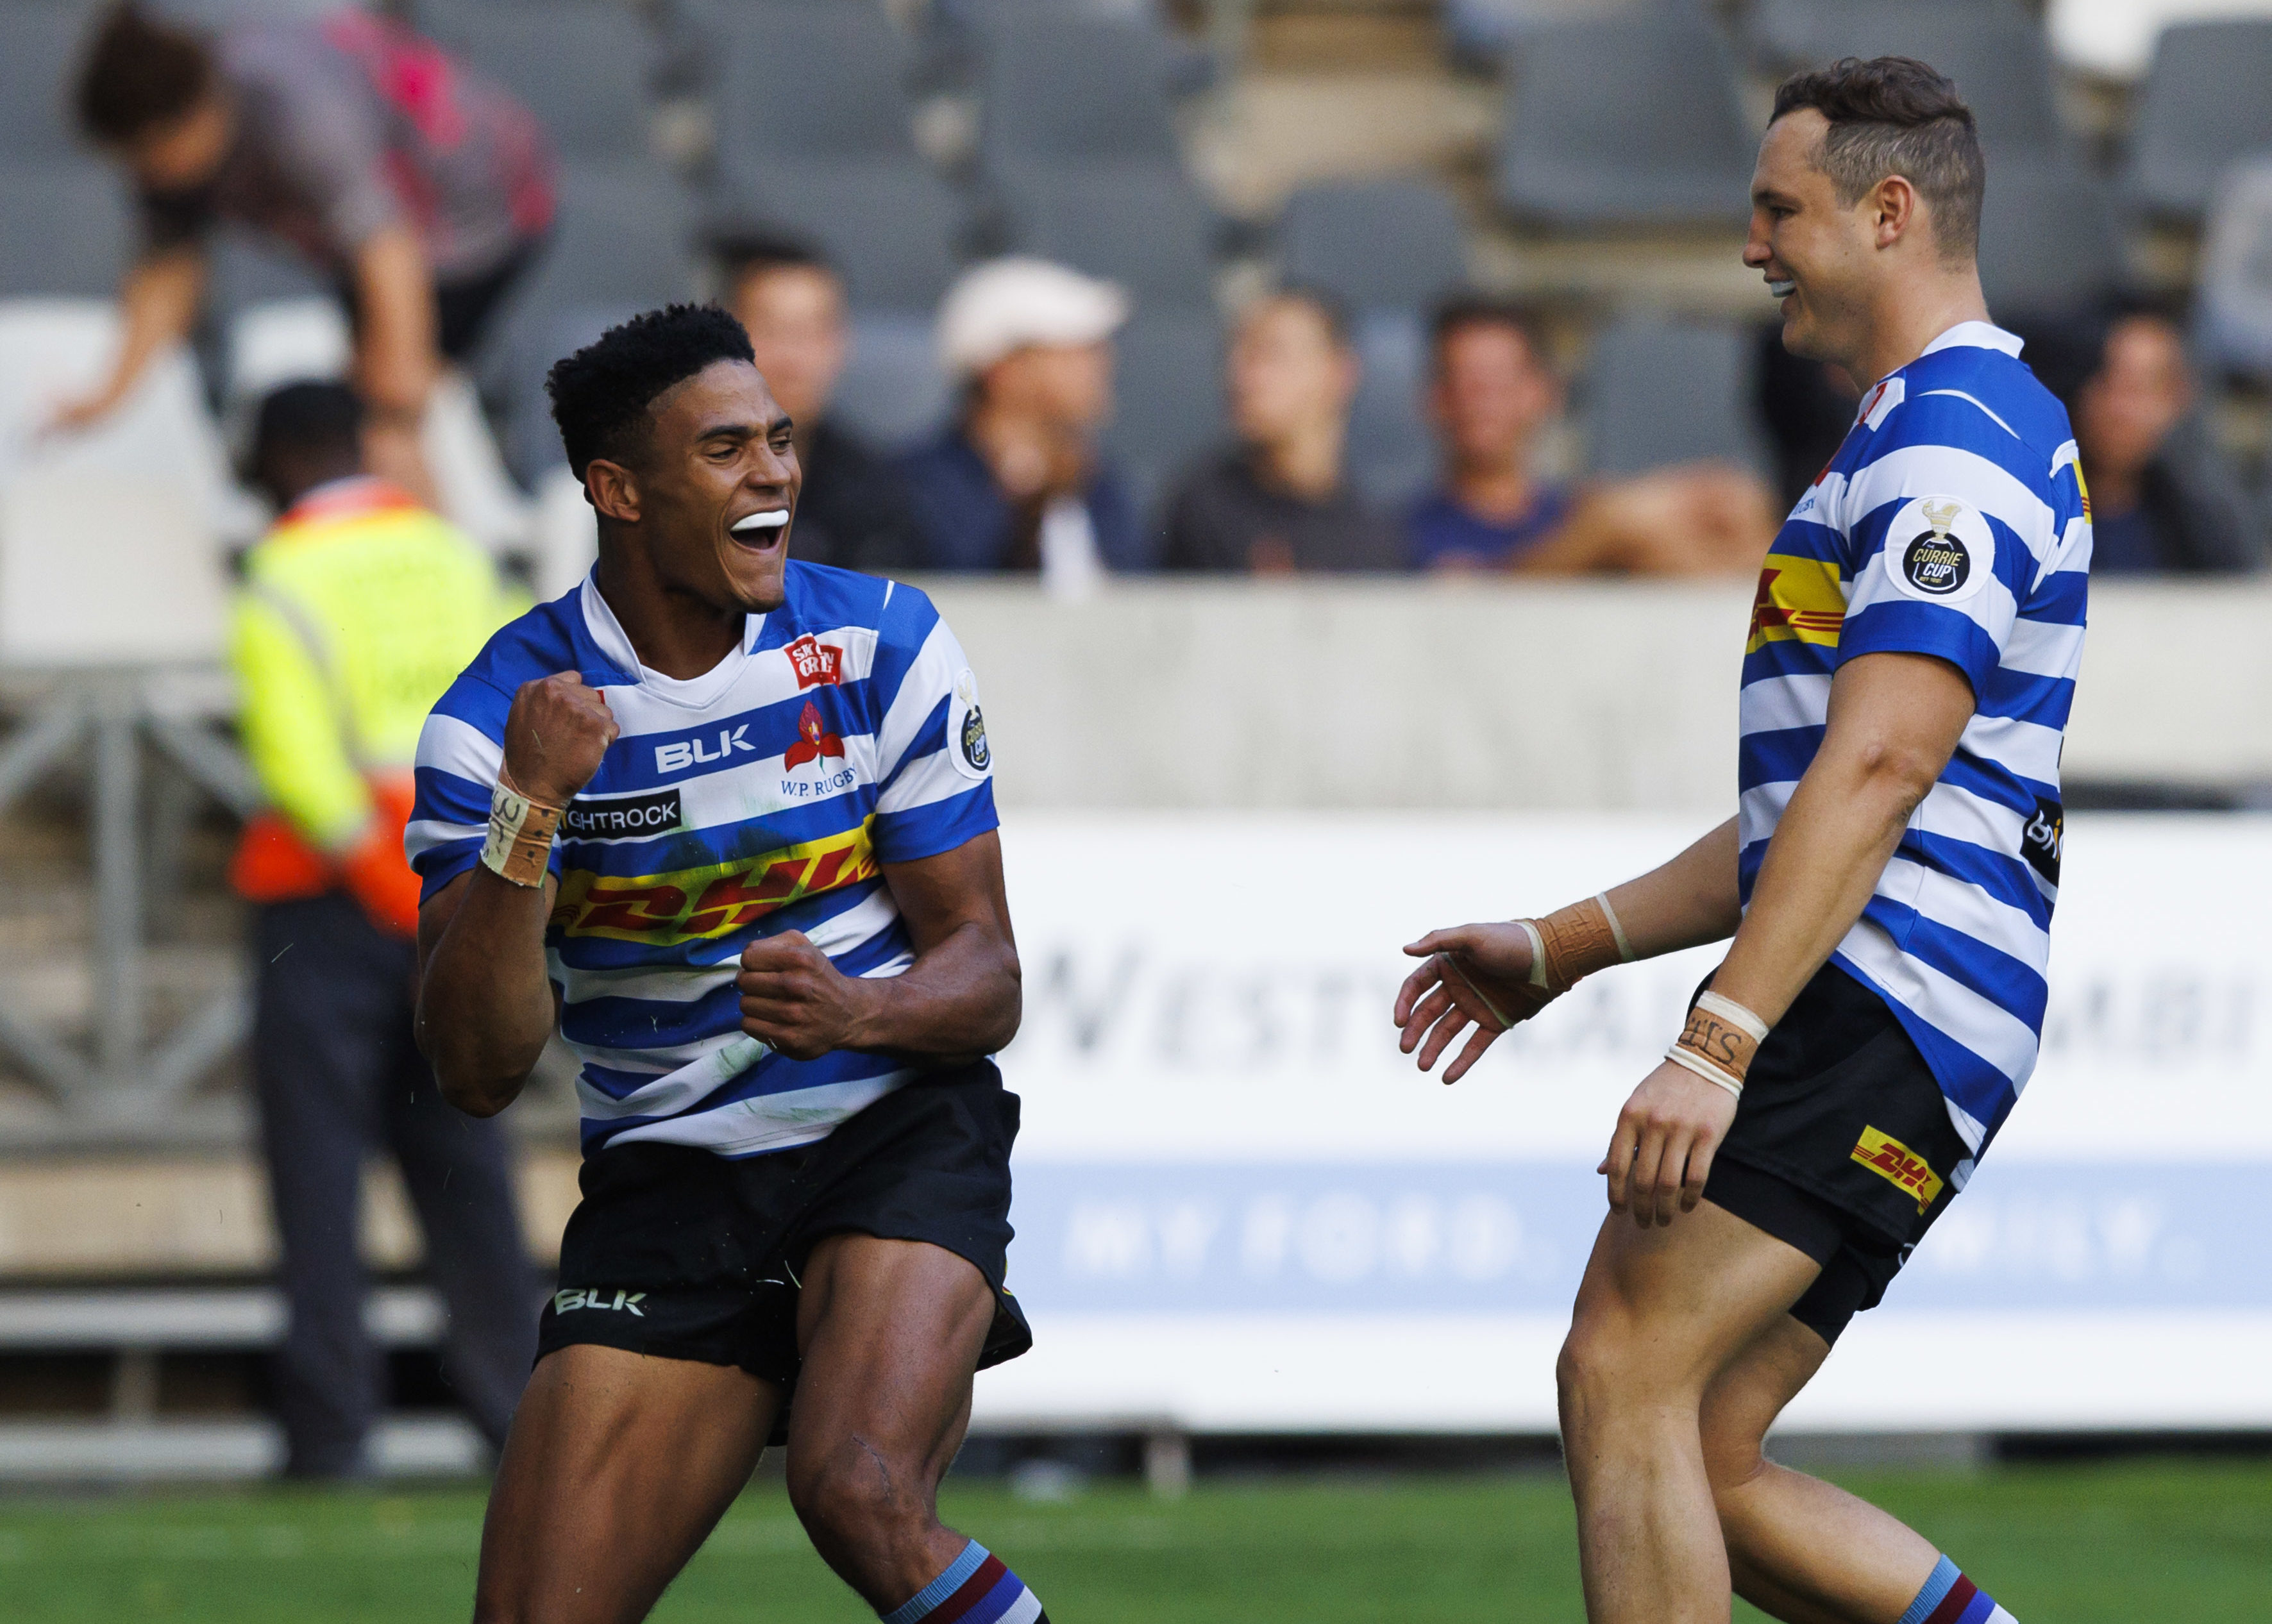 Currie Cup picks WP, Sharks coast to victory